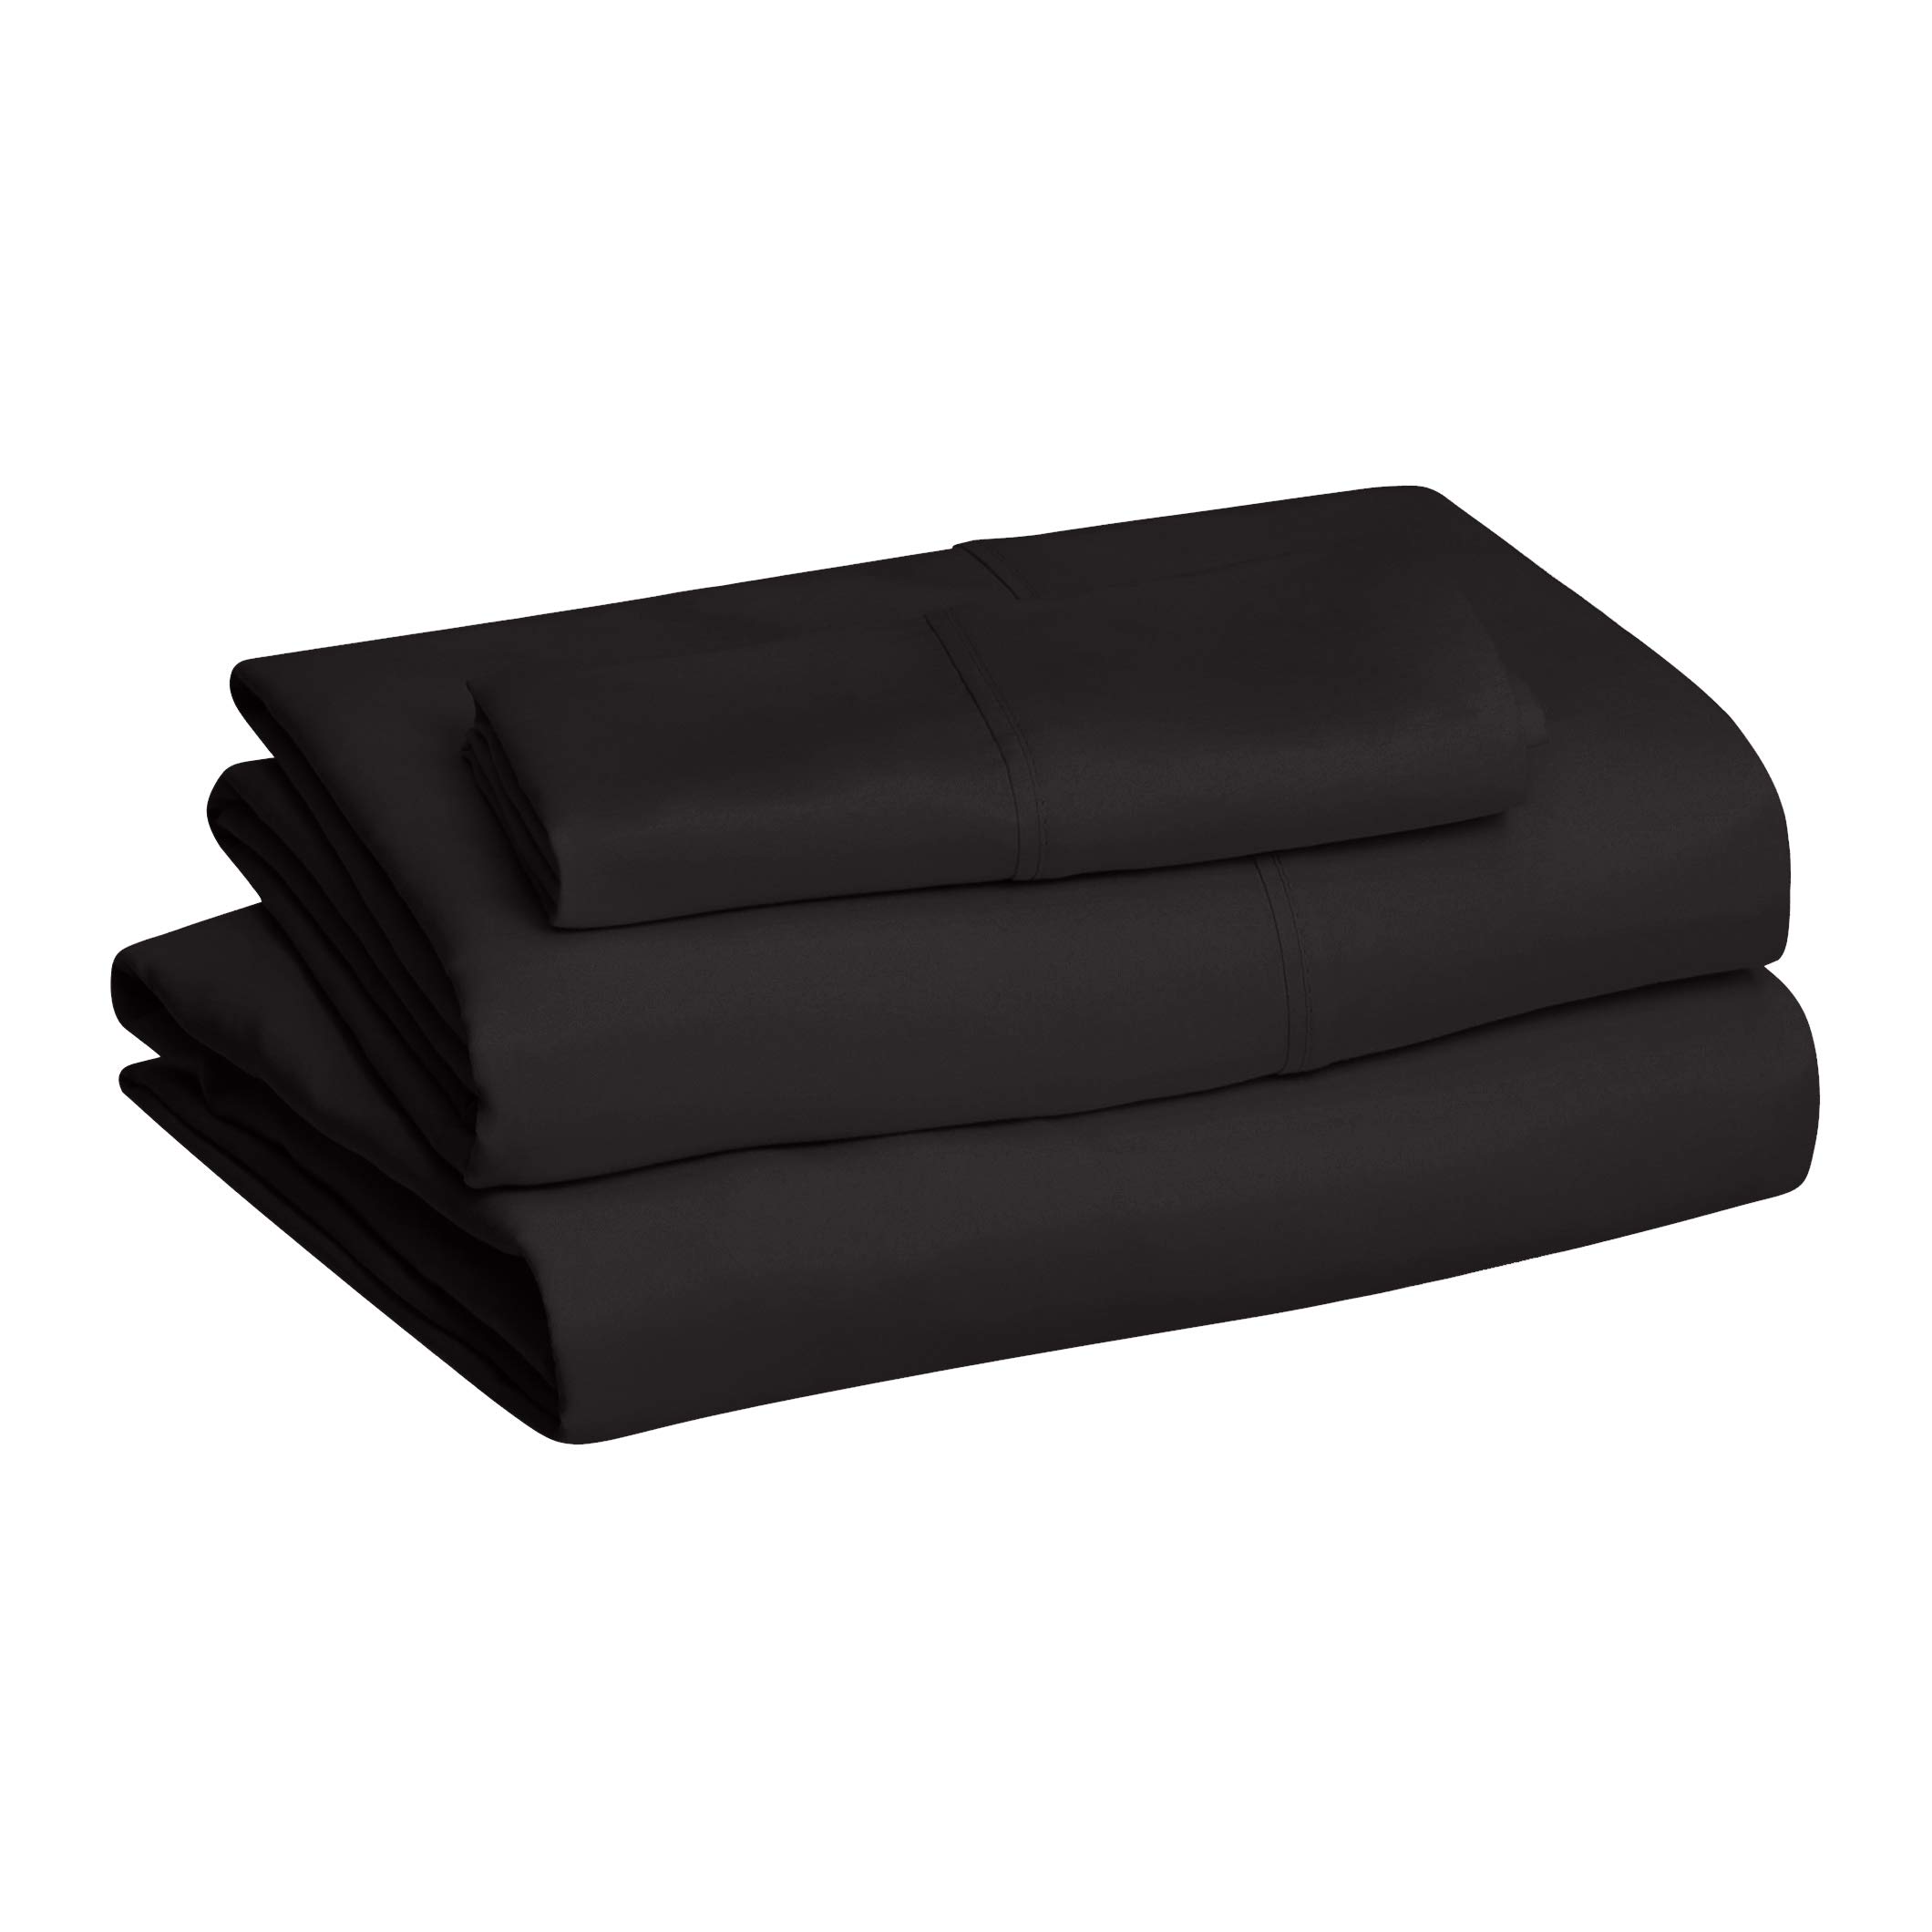 Book Cover Amazon Basics Lightweight Super Soft Easy Care Microfiber 3 Piece Bed Sheet Set With 14-Inch Deep Pockets, Twin XL, Black, Solid Twin XL Sheet Set Black